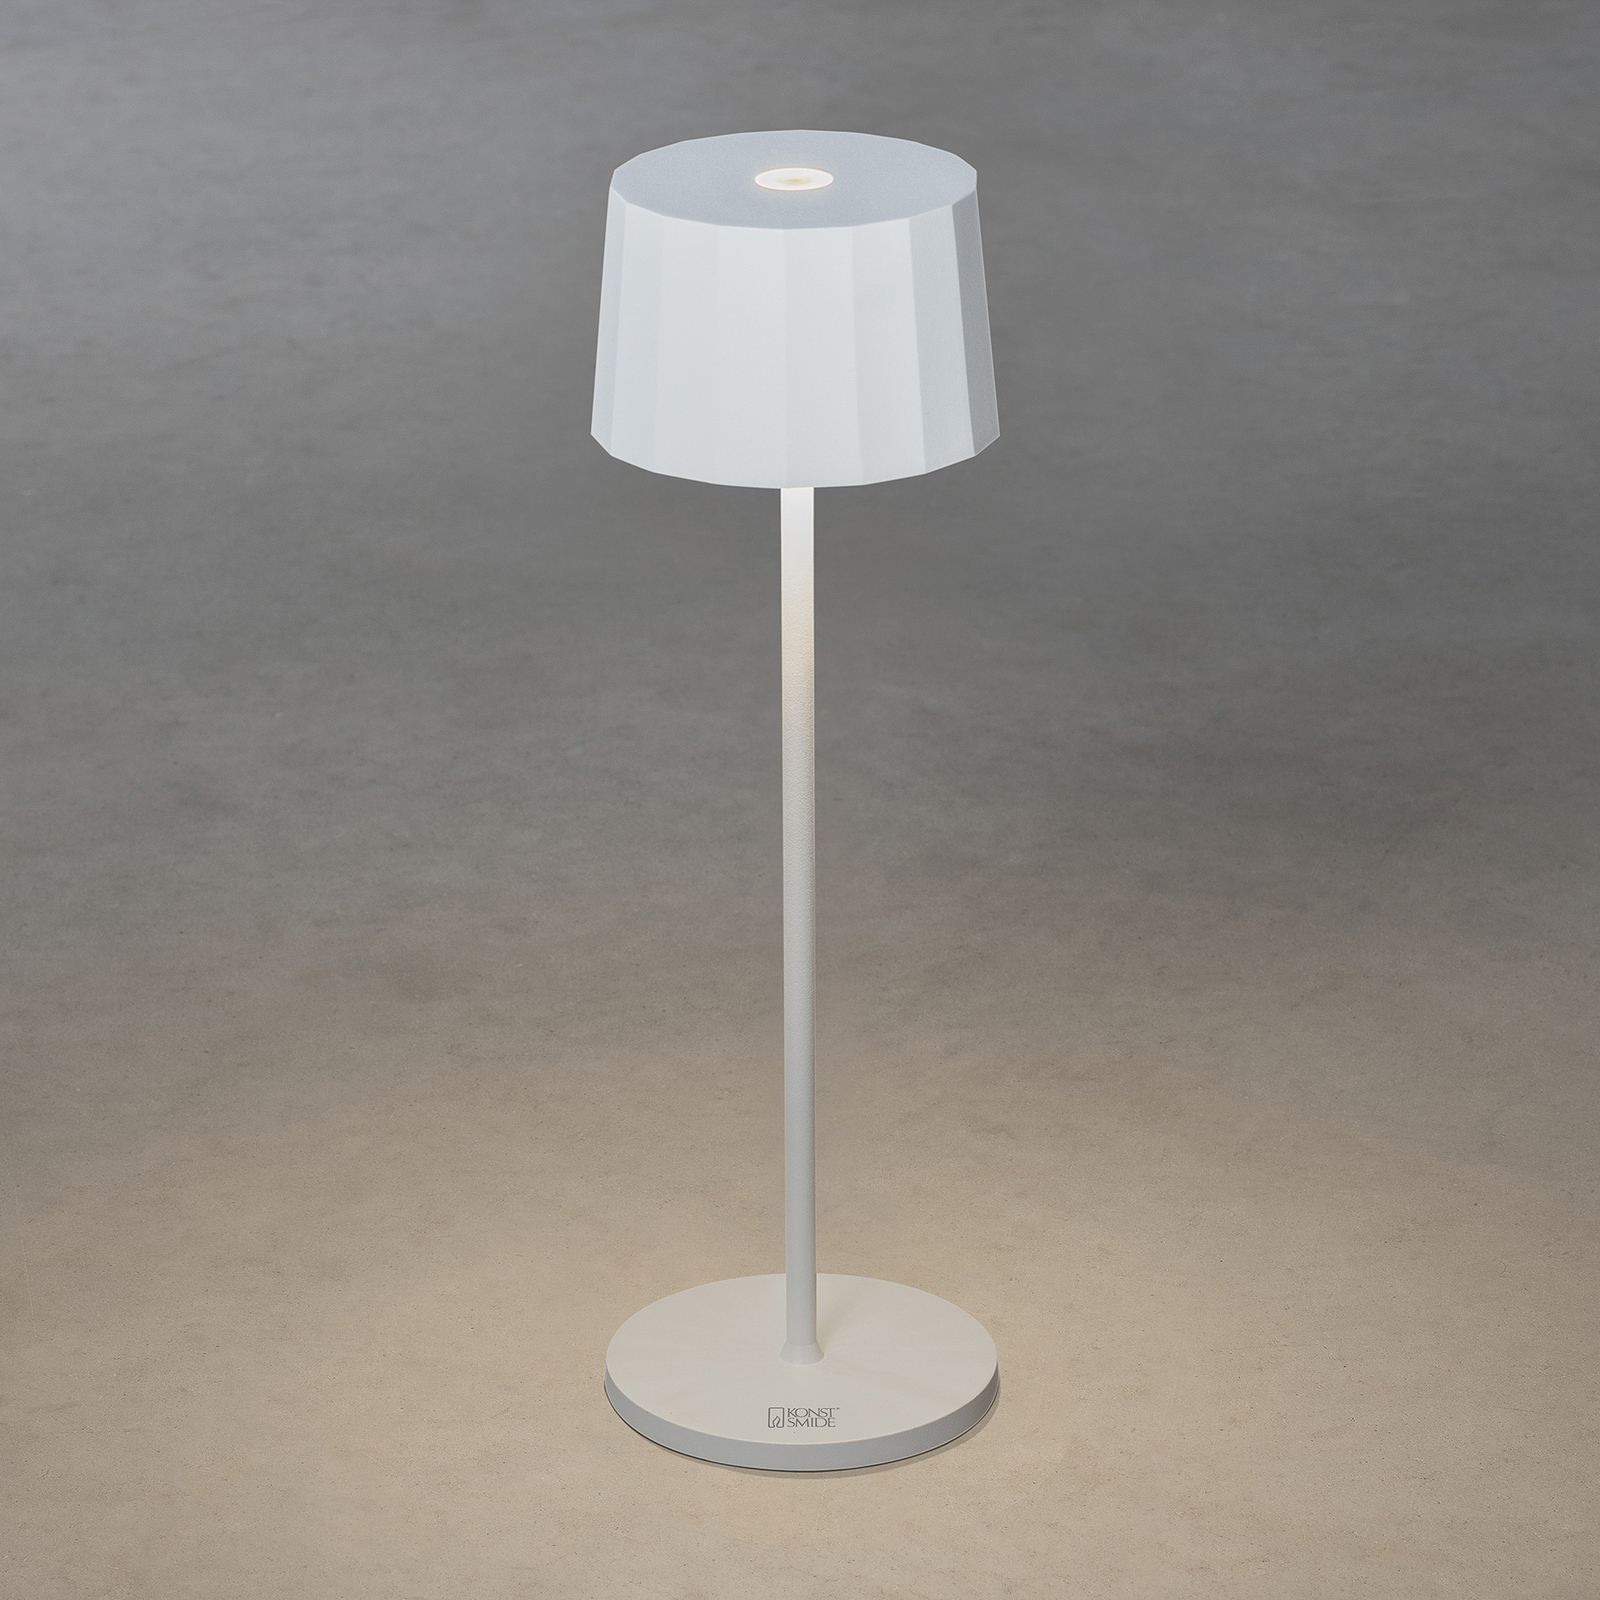 Positano LED table lamp for outdoors, white